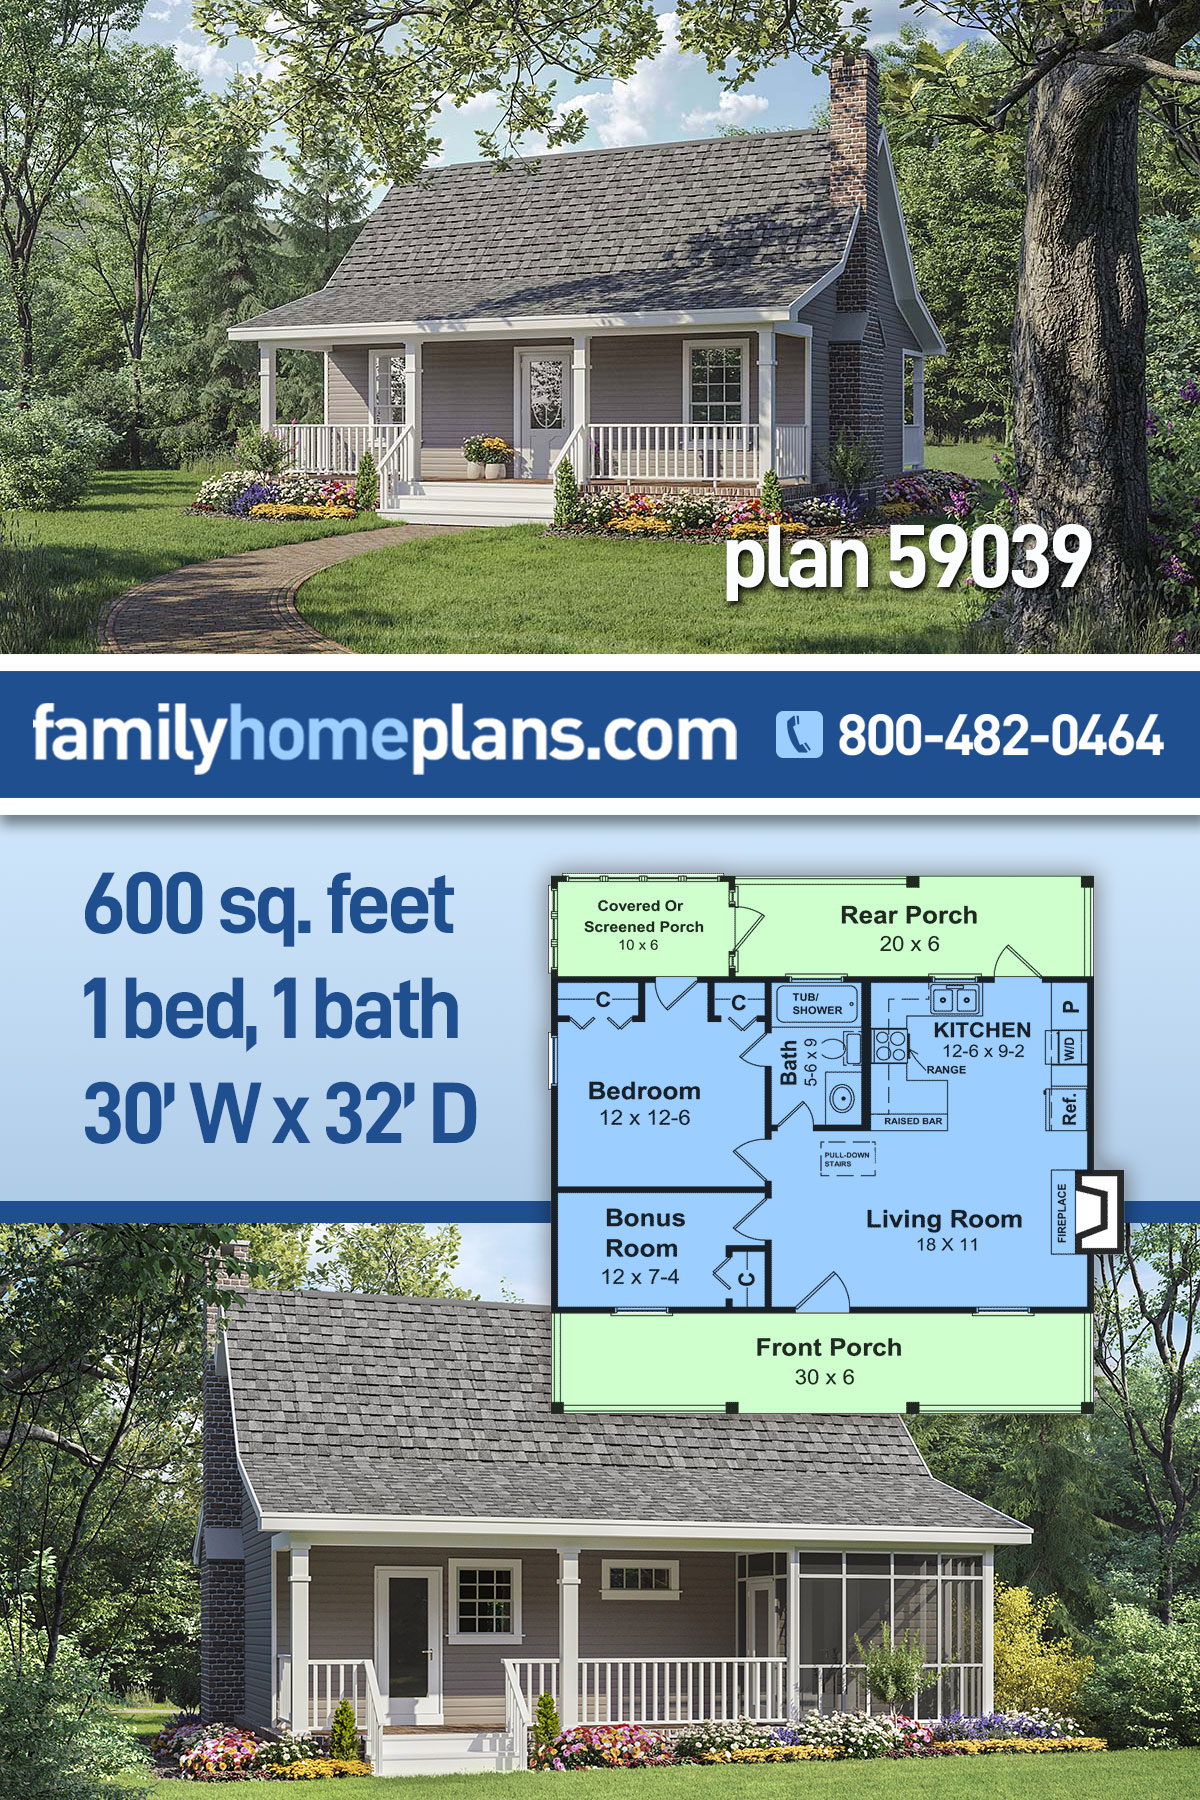 Southern Style House Plan 59039 With 600 Sq Ft 1 Bed 1 Bath